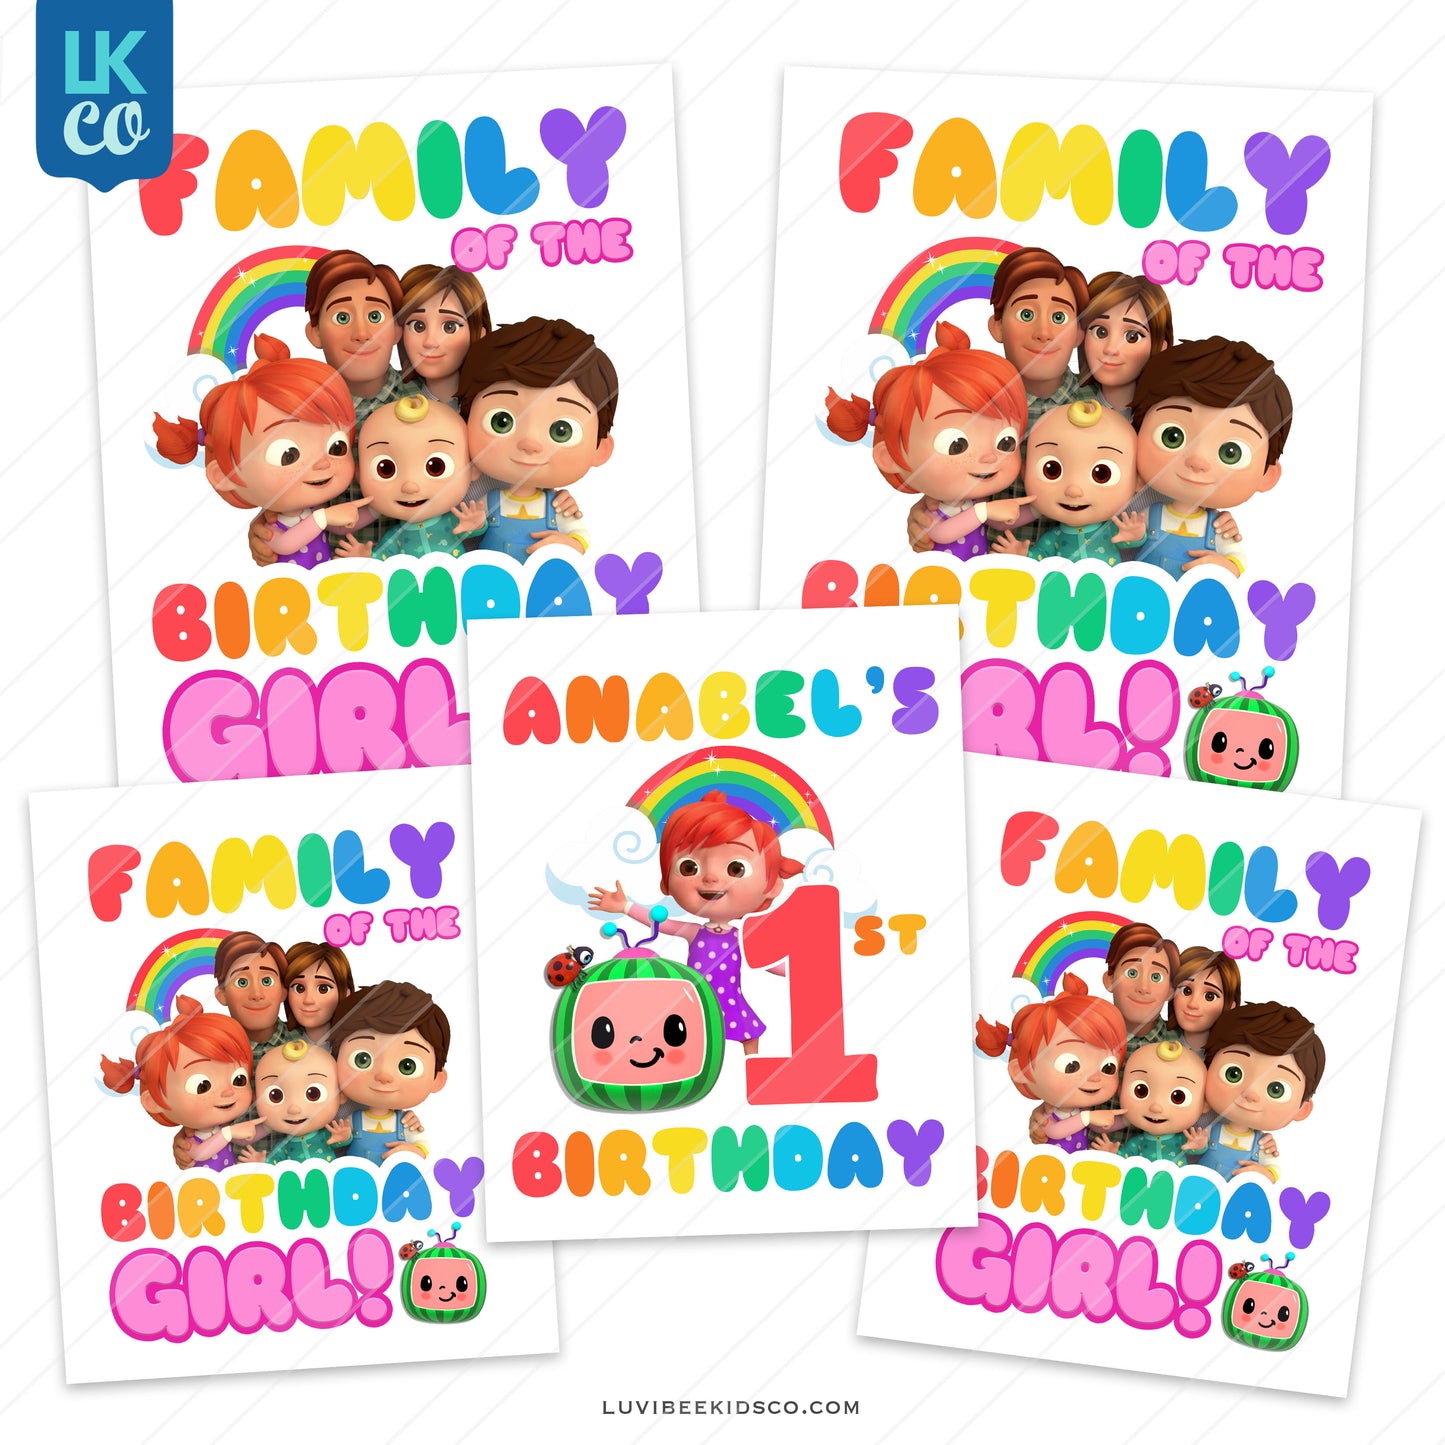 Cocomelon Inspired Heat Transfer Designs - Family Pack - Birthday Girl